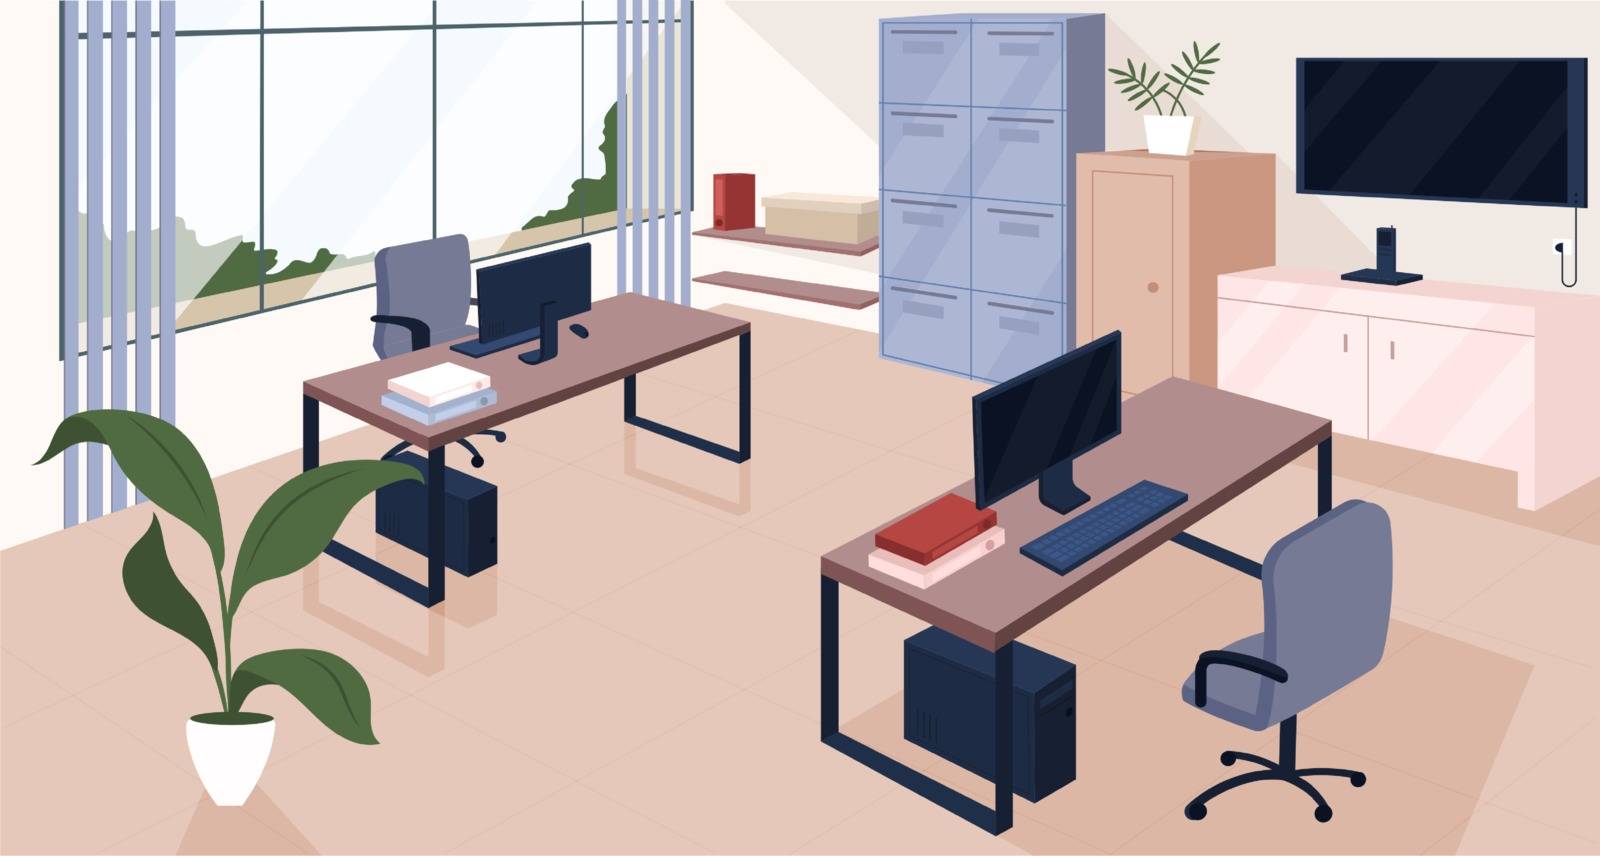 Coworking space flat color vector illustration by ntl